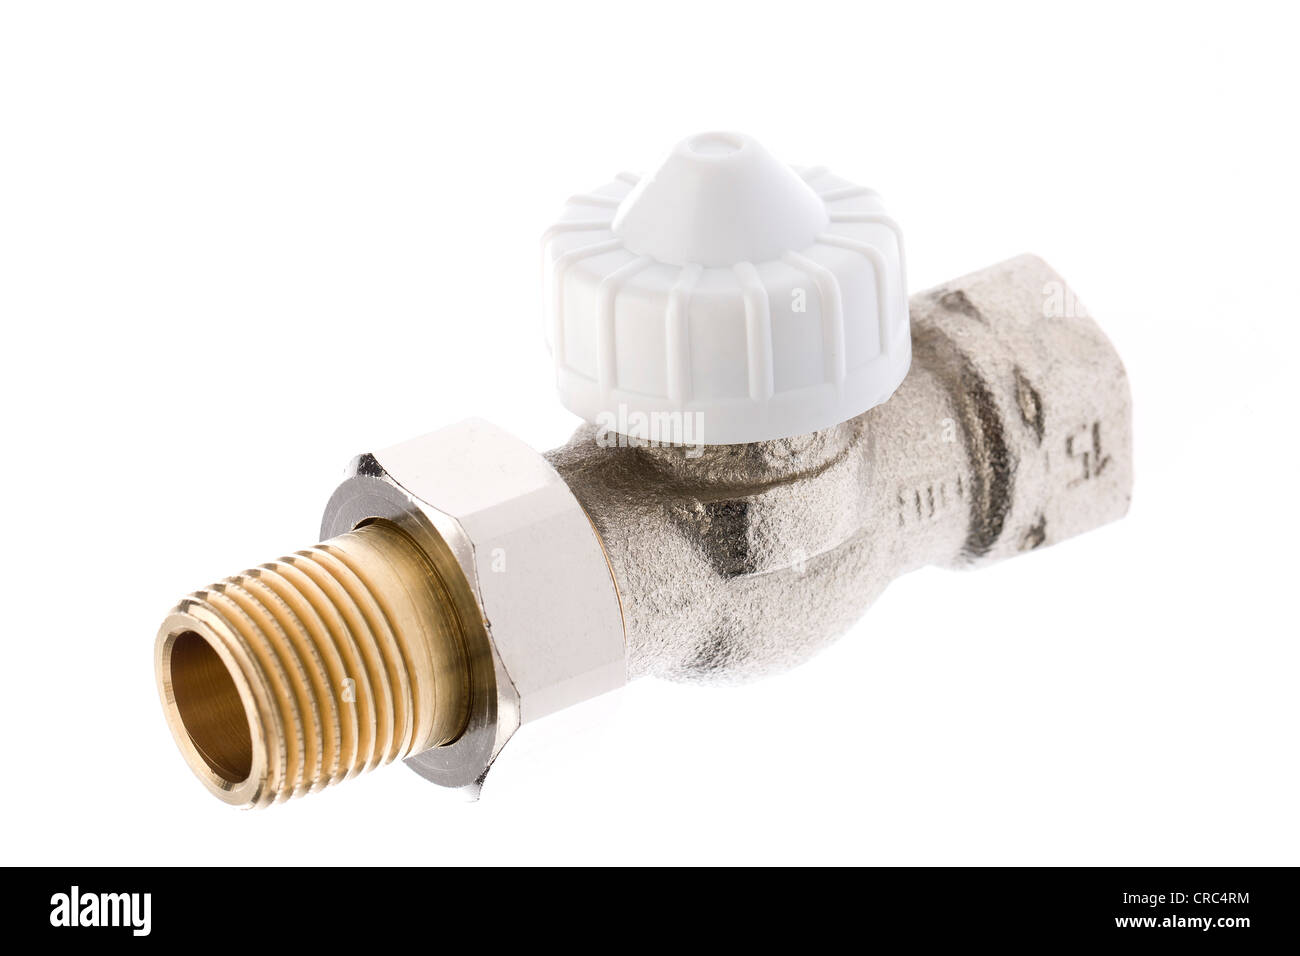 Thermostatic valve for hydronic radiator and floor heating applications Stock Photo